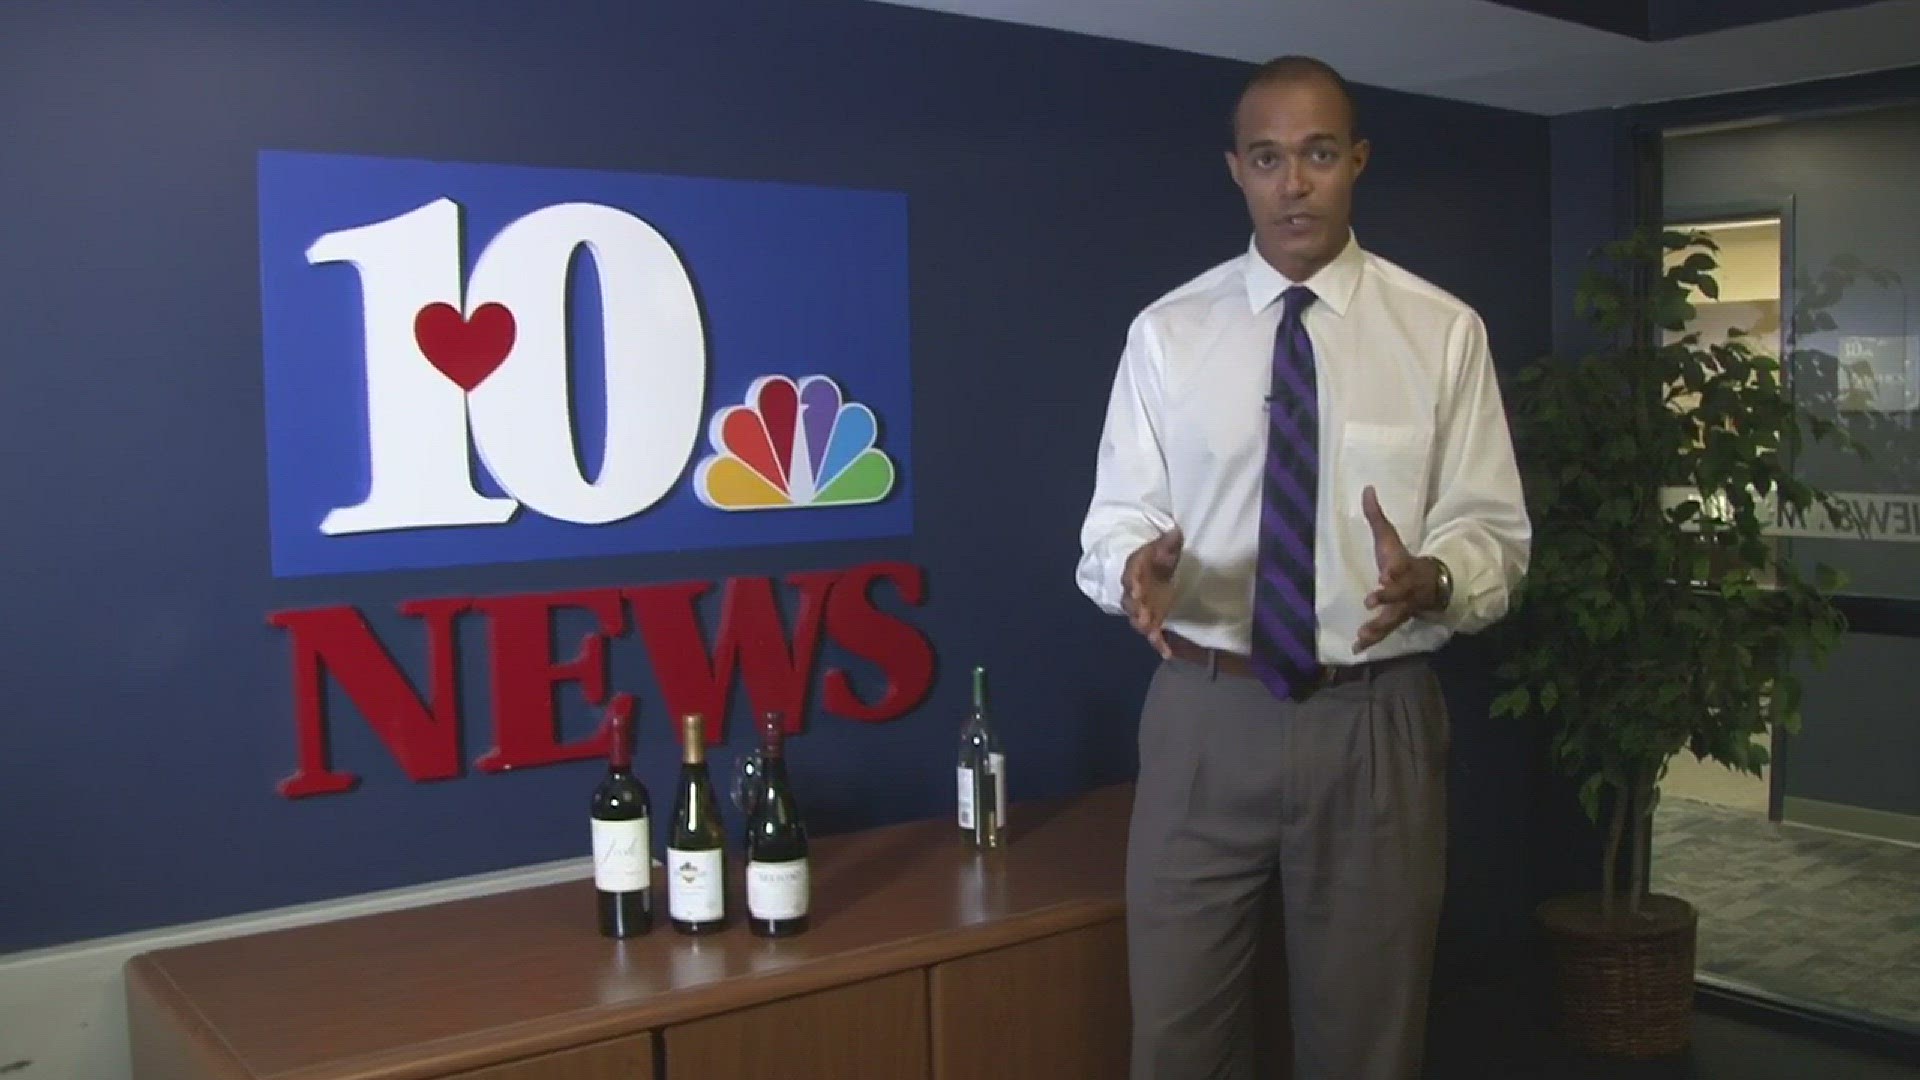 Tonight on the Nightbeat, Aaron Wright compares the price of typical wines found at grocery stores and liquor stores. Are you getting the best deal?